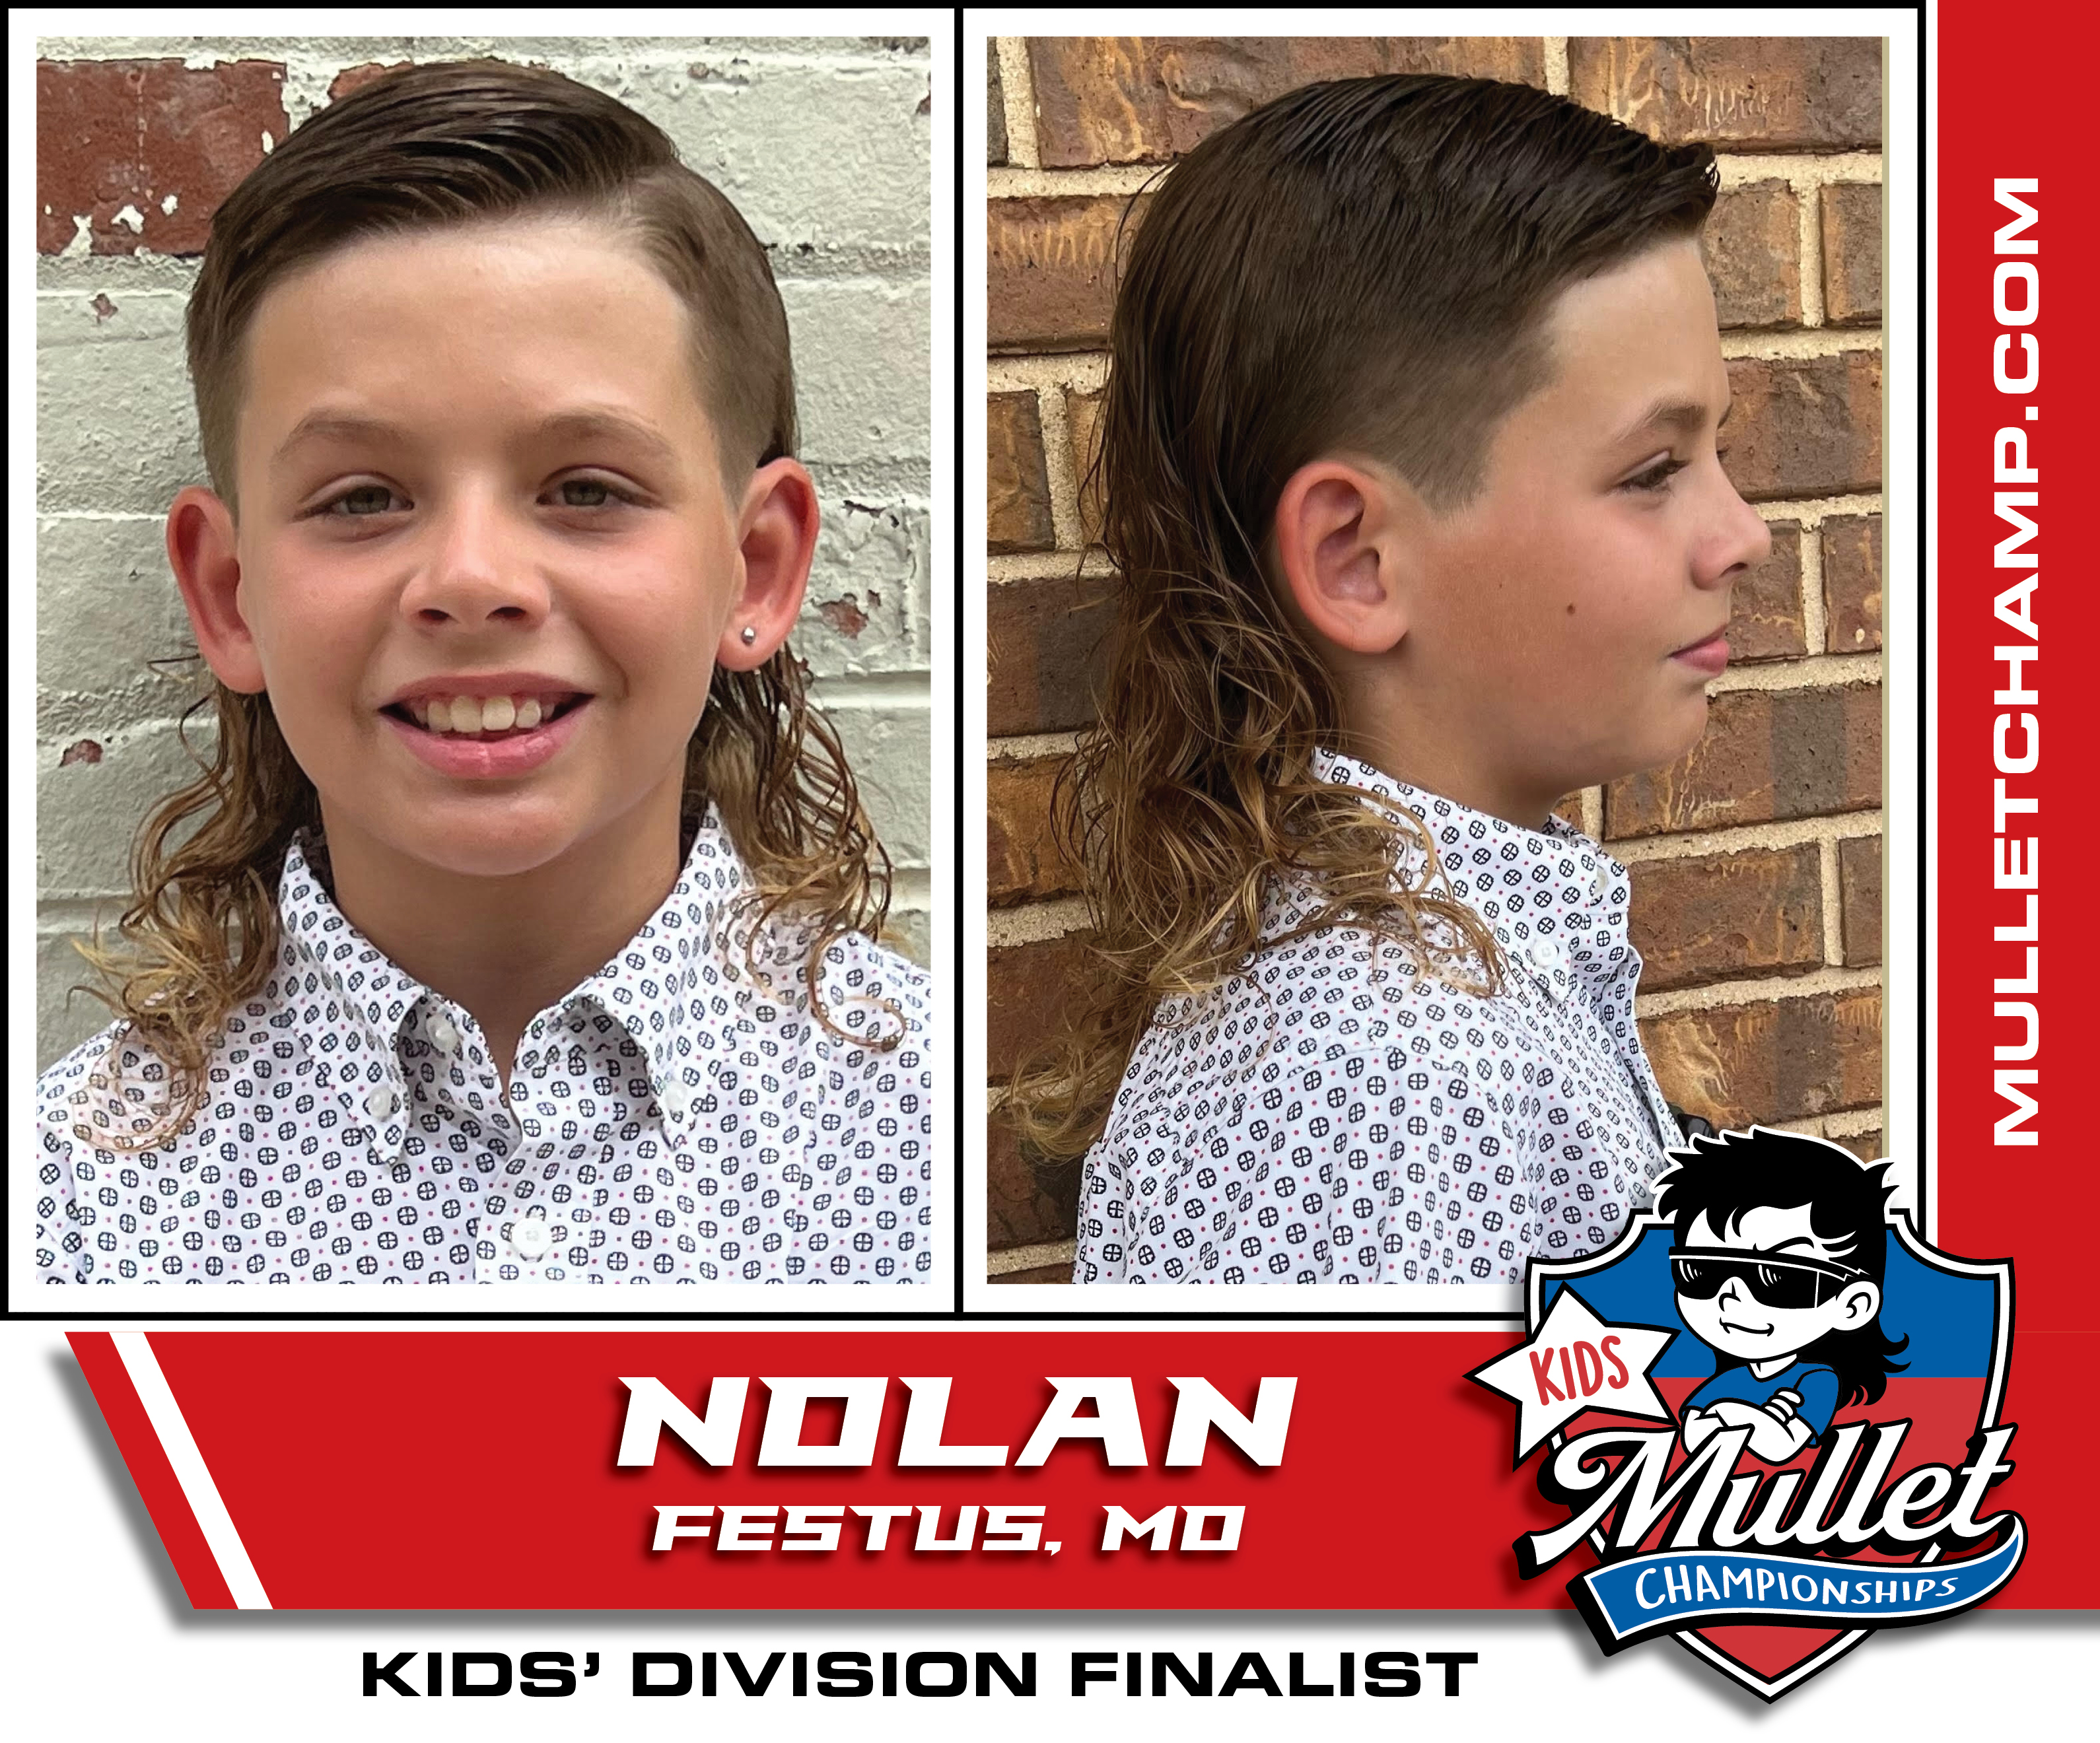 Kids Division finalist in the 2022 USA Mullet Championships.